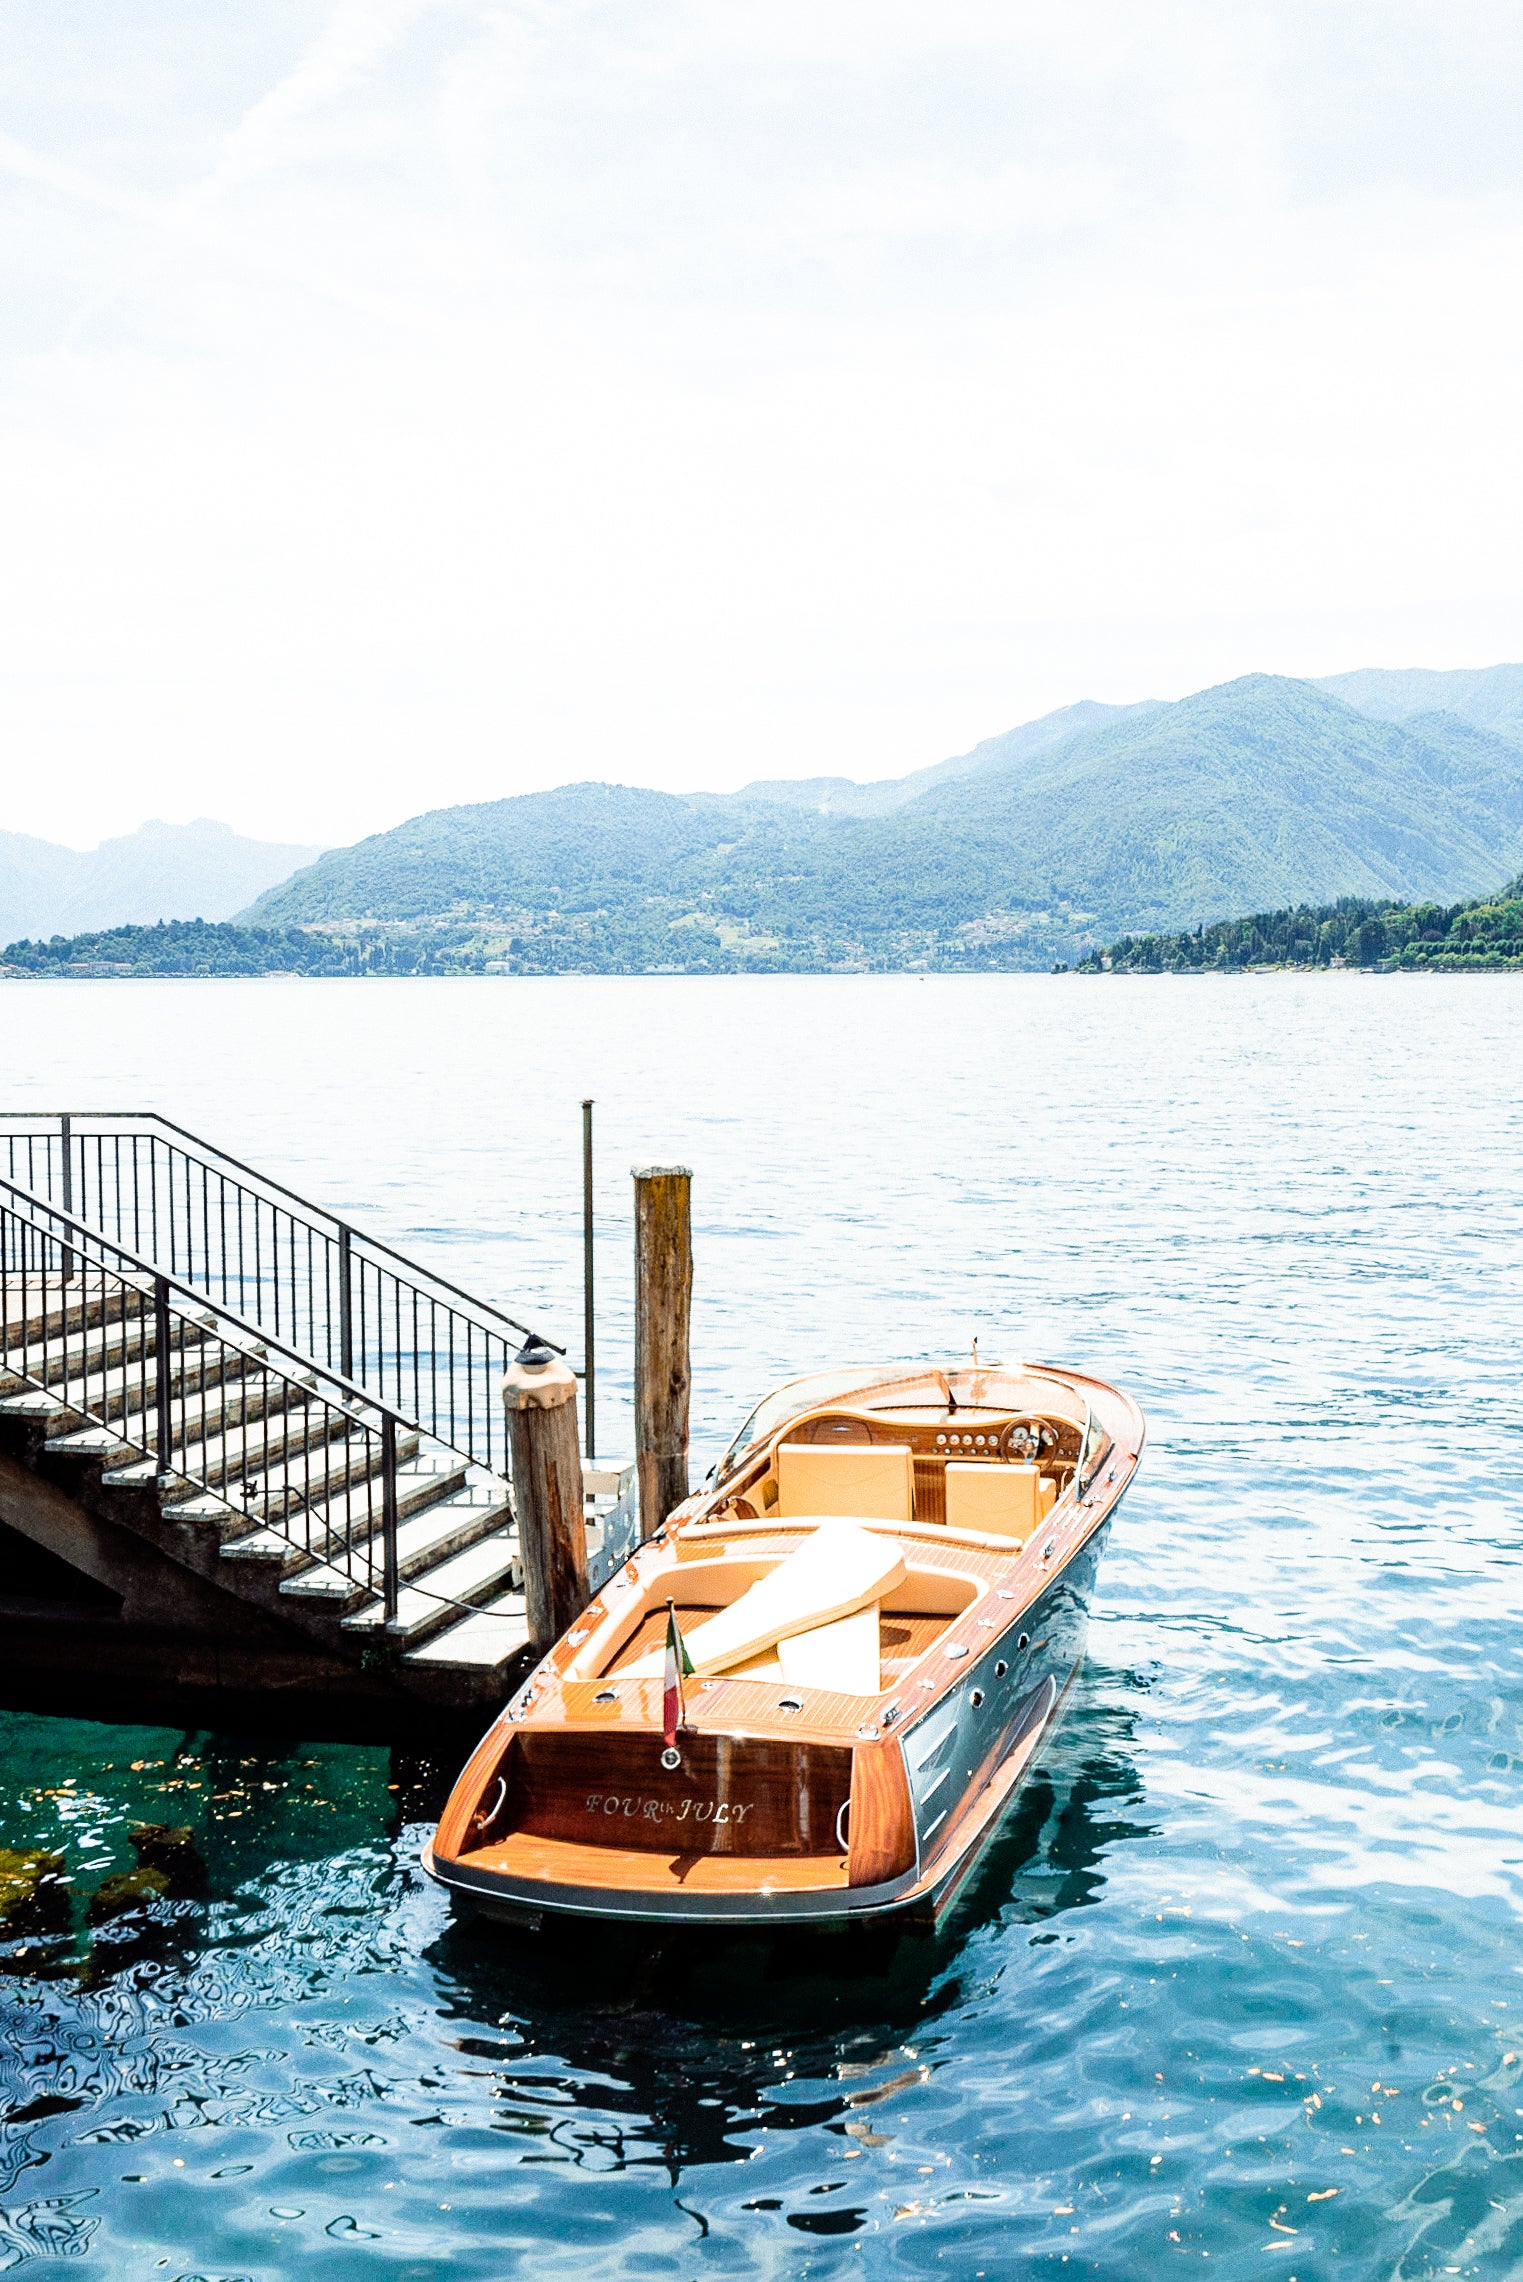 Live La Dolce Vita on famous Lake Como with our premier classic wooden boats. The ultimate way to travel in complete style on the lake, just as George Clooney does.